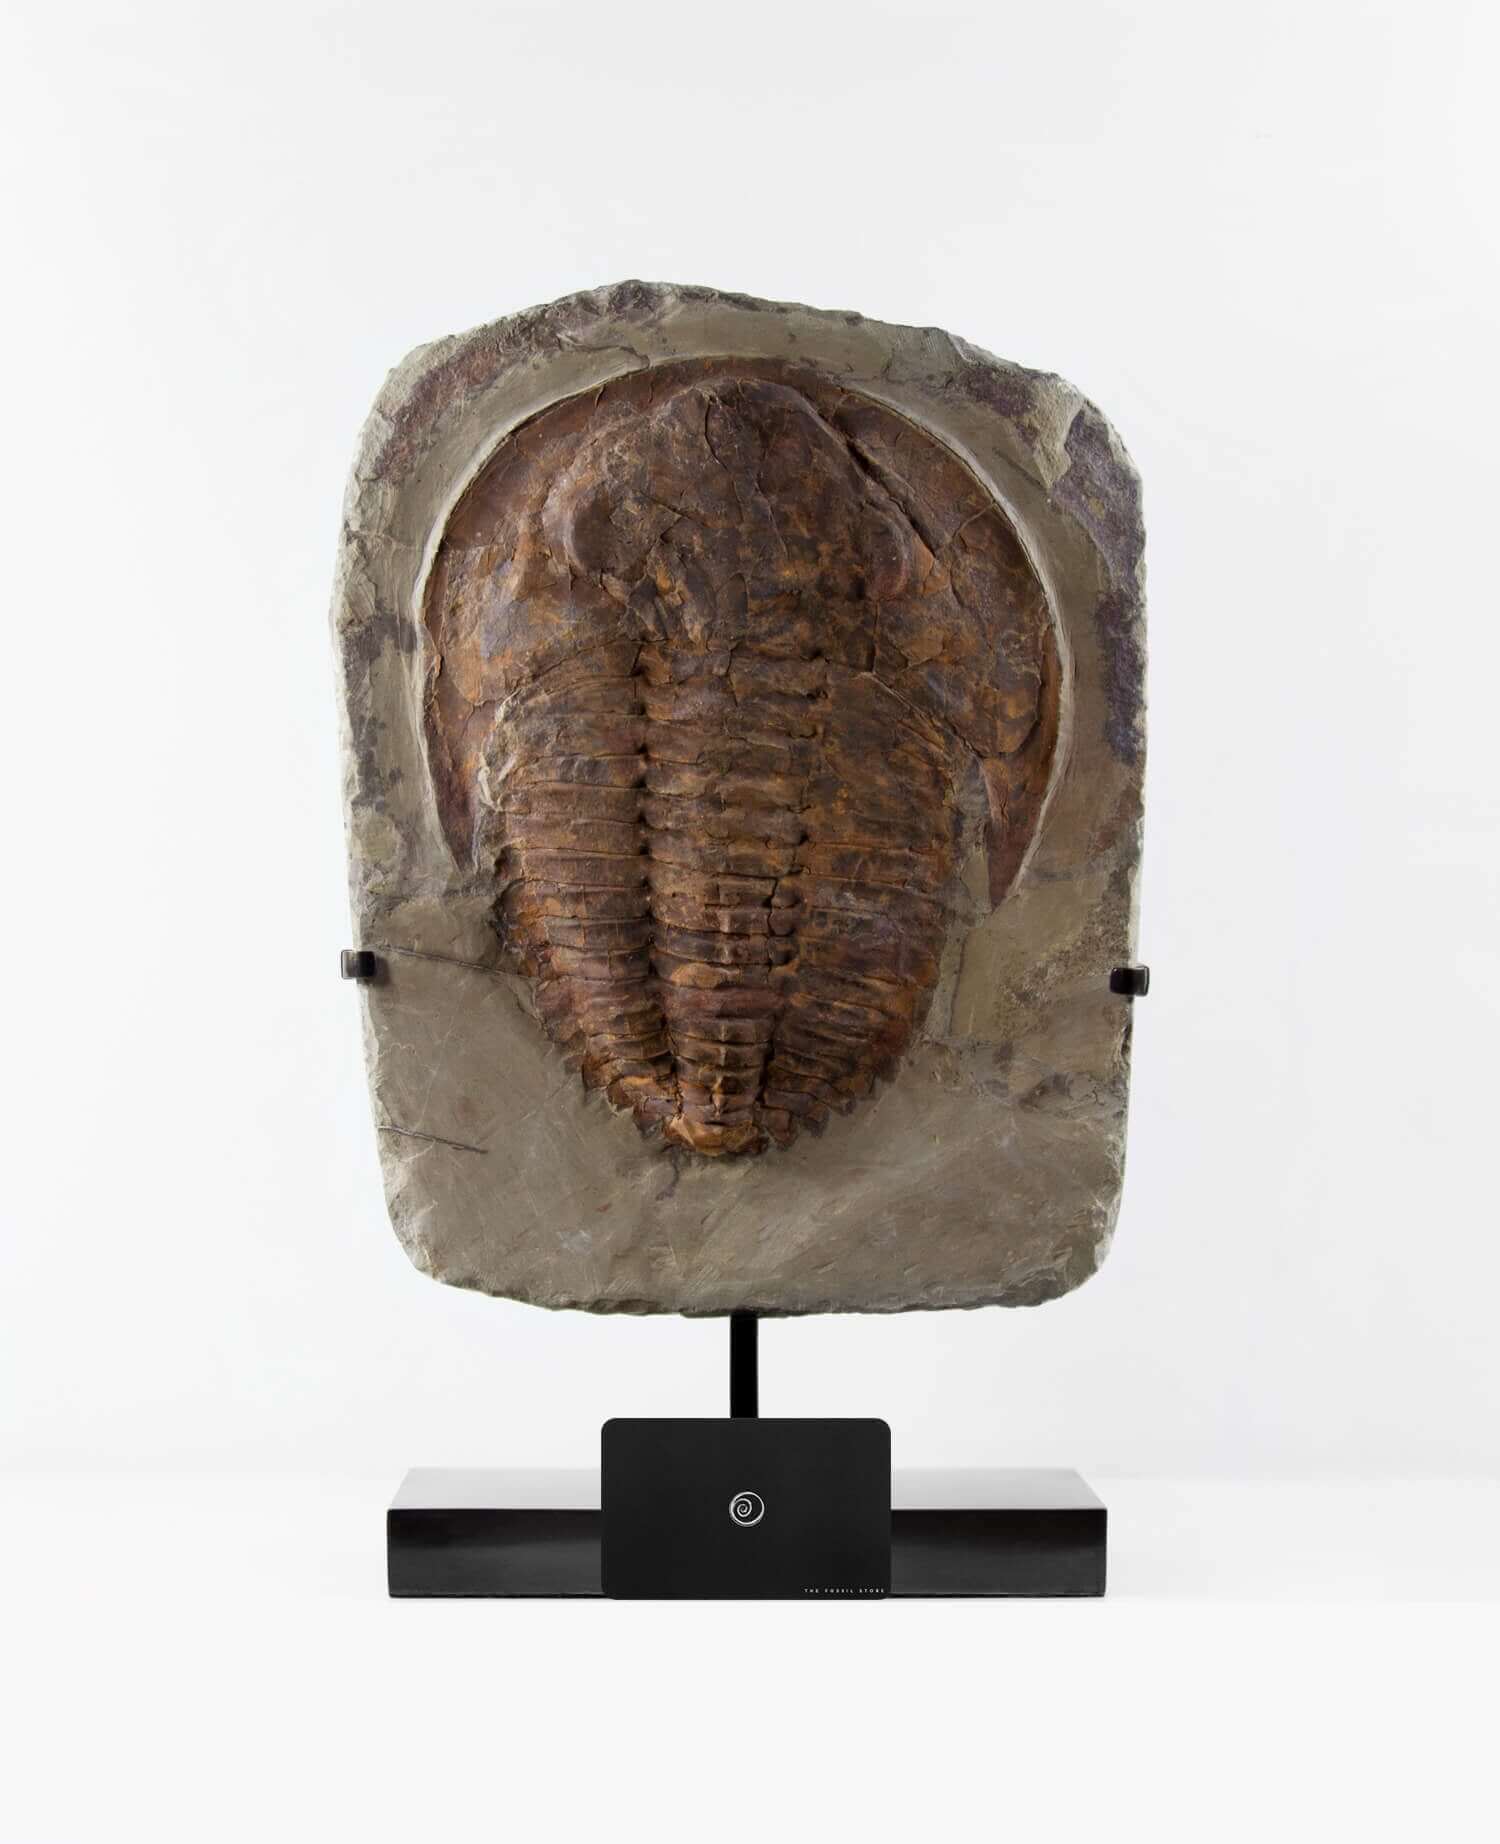 A Cambropallas tellesto fossil trilobite for sale measuring 410mm presented on a bronze stand at THE FOSSIL STORE